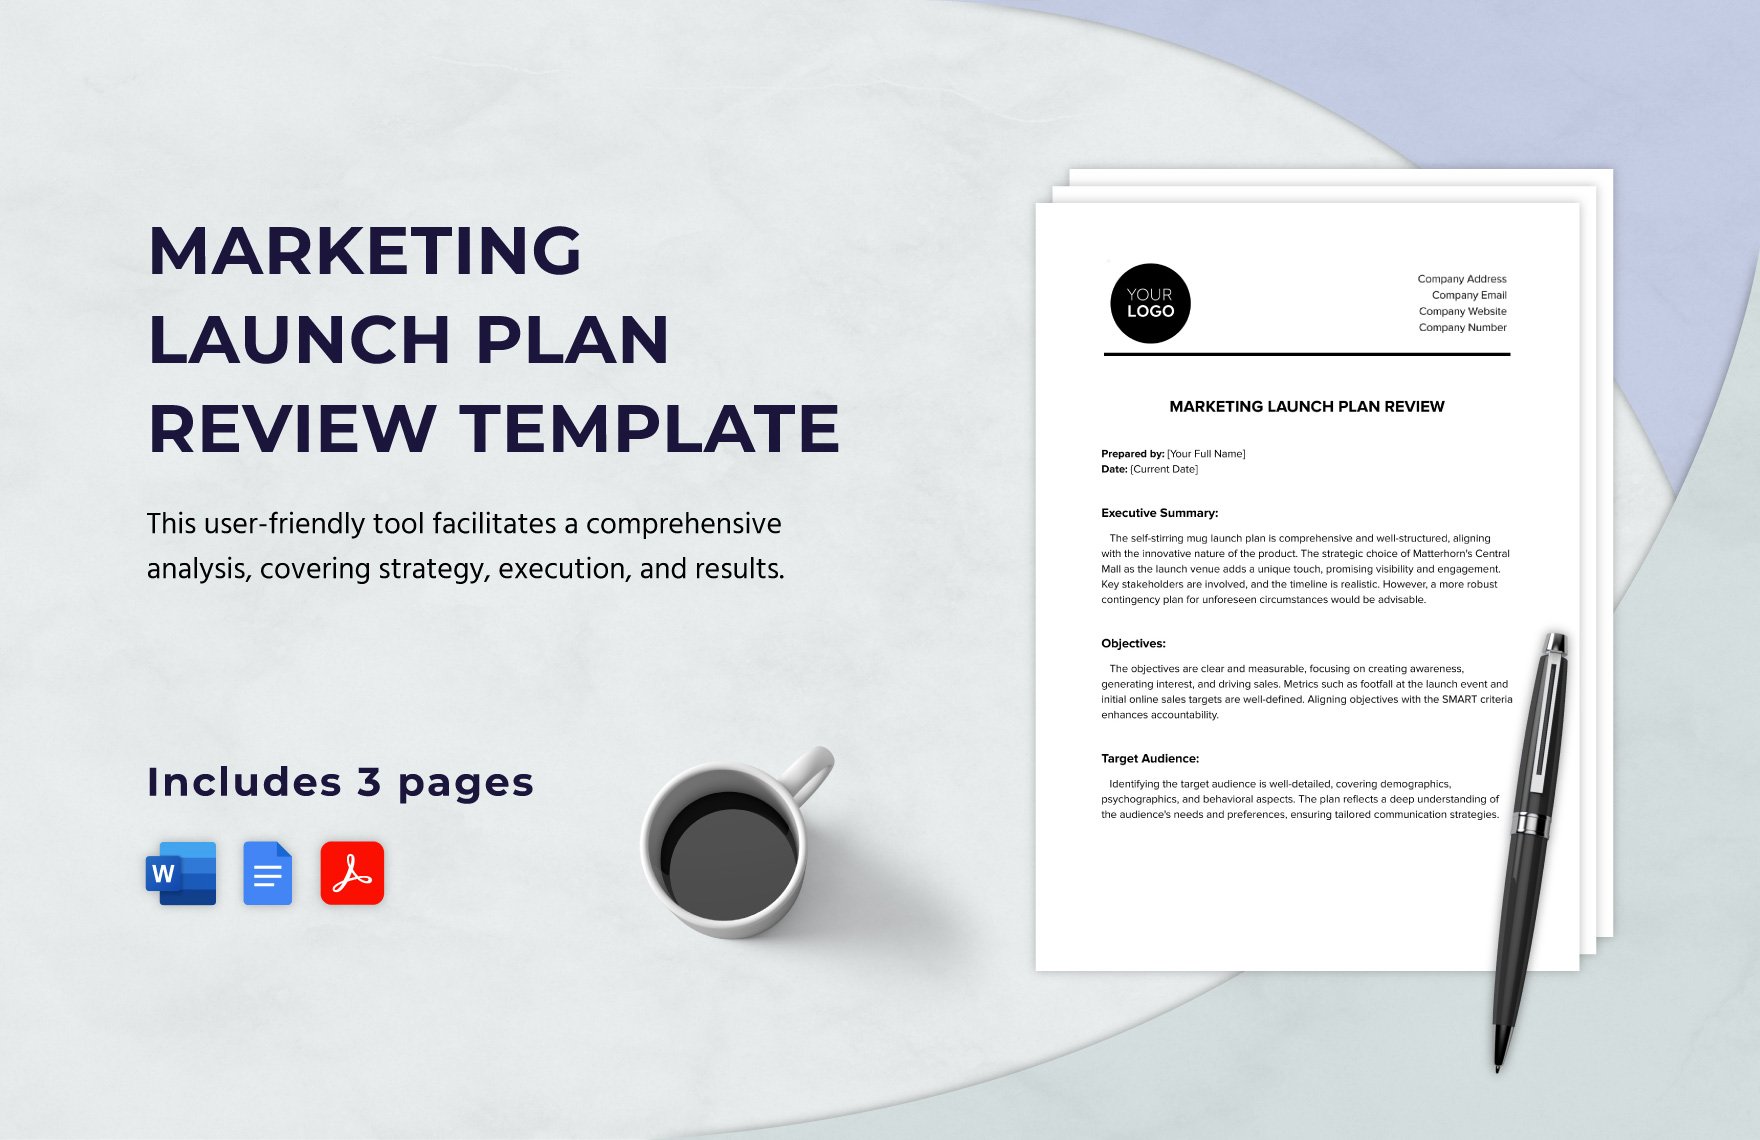 Marketing Launch Plan Review Template